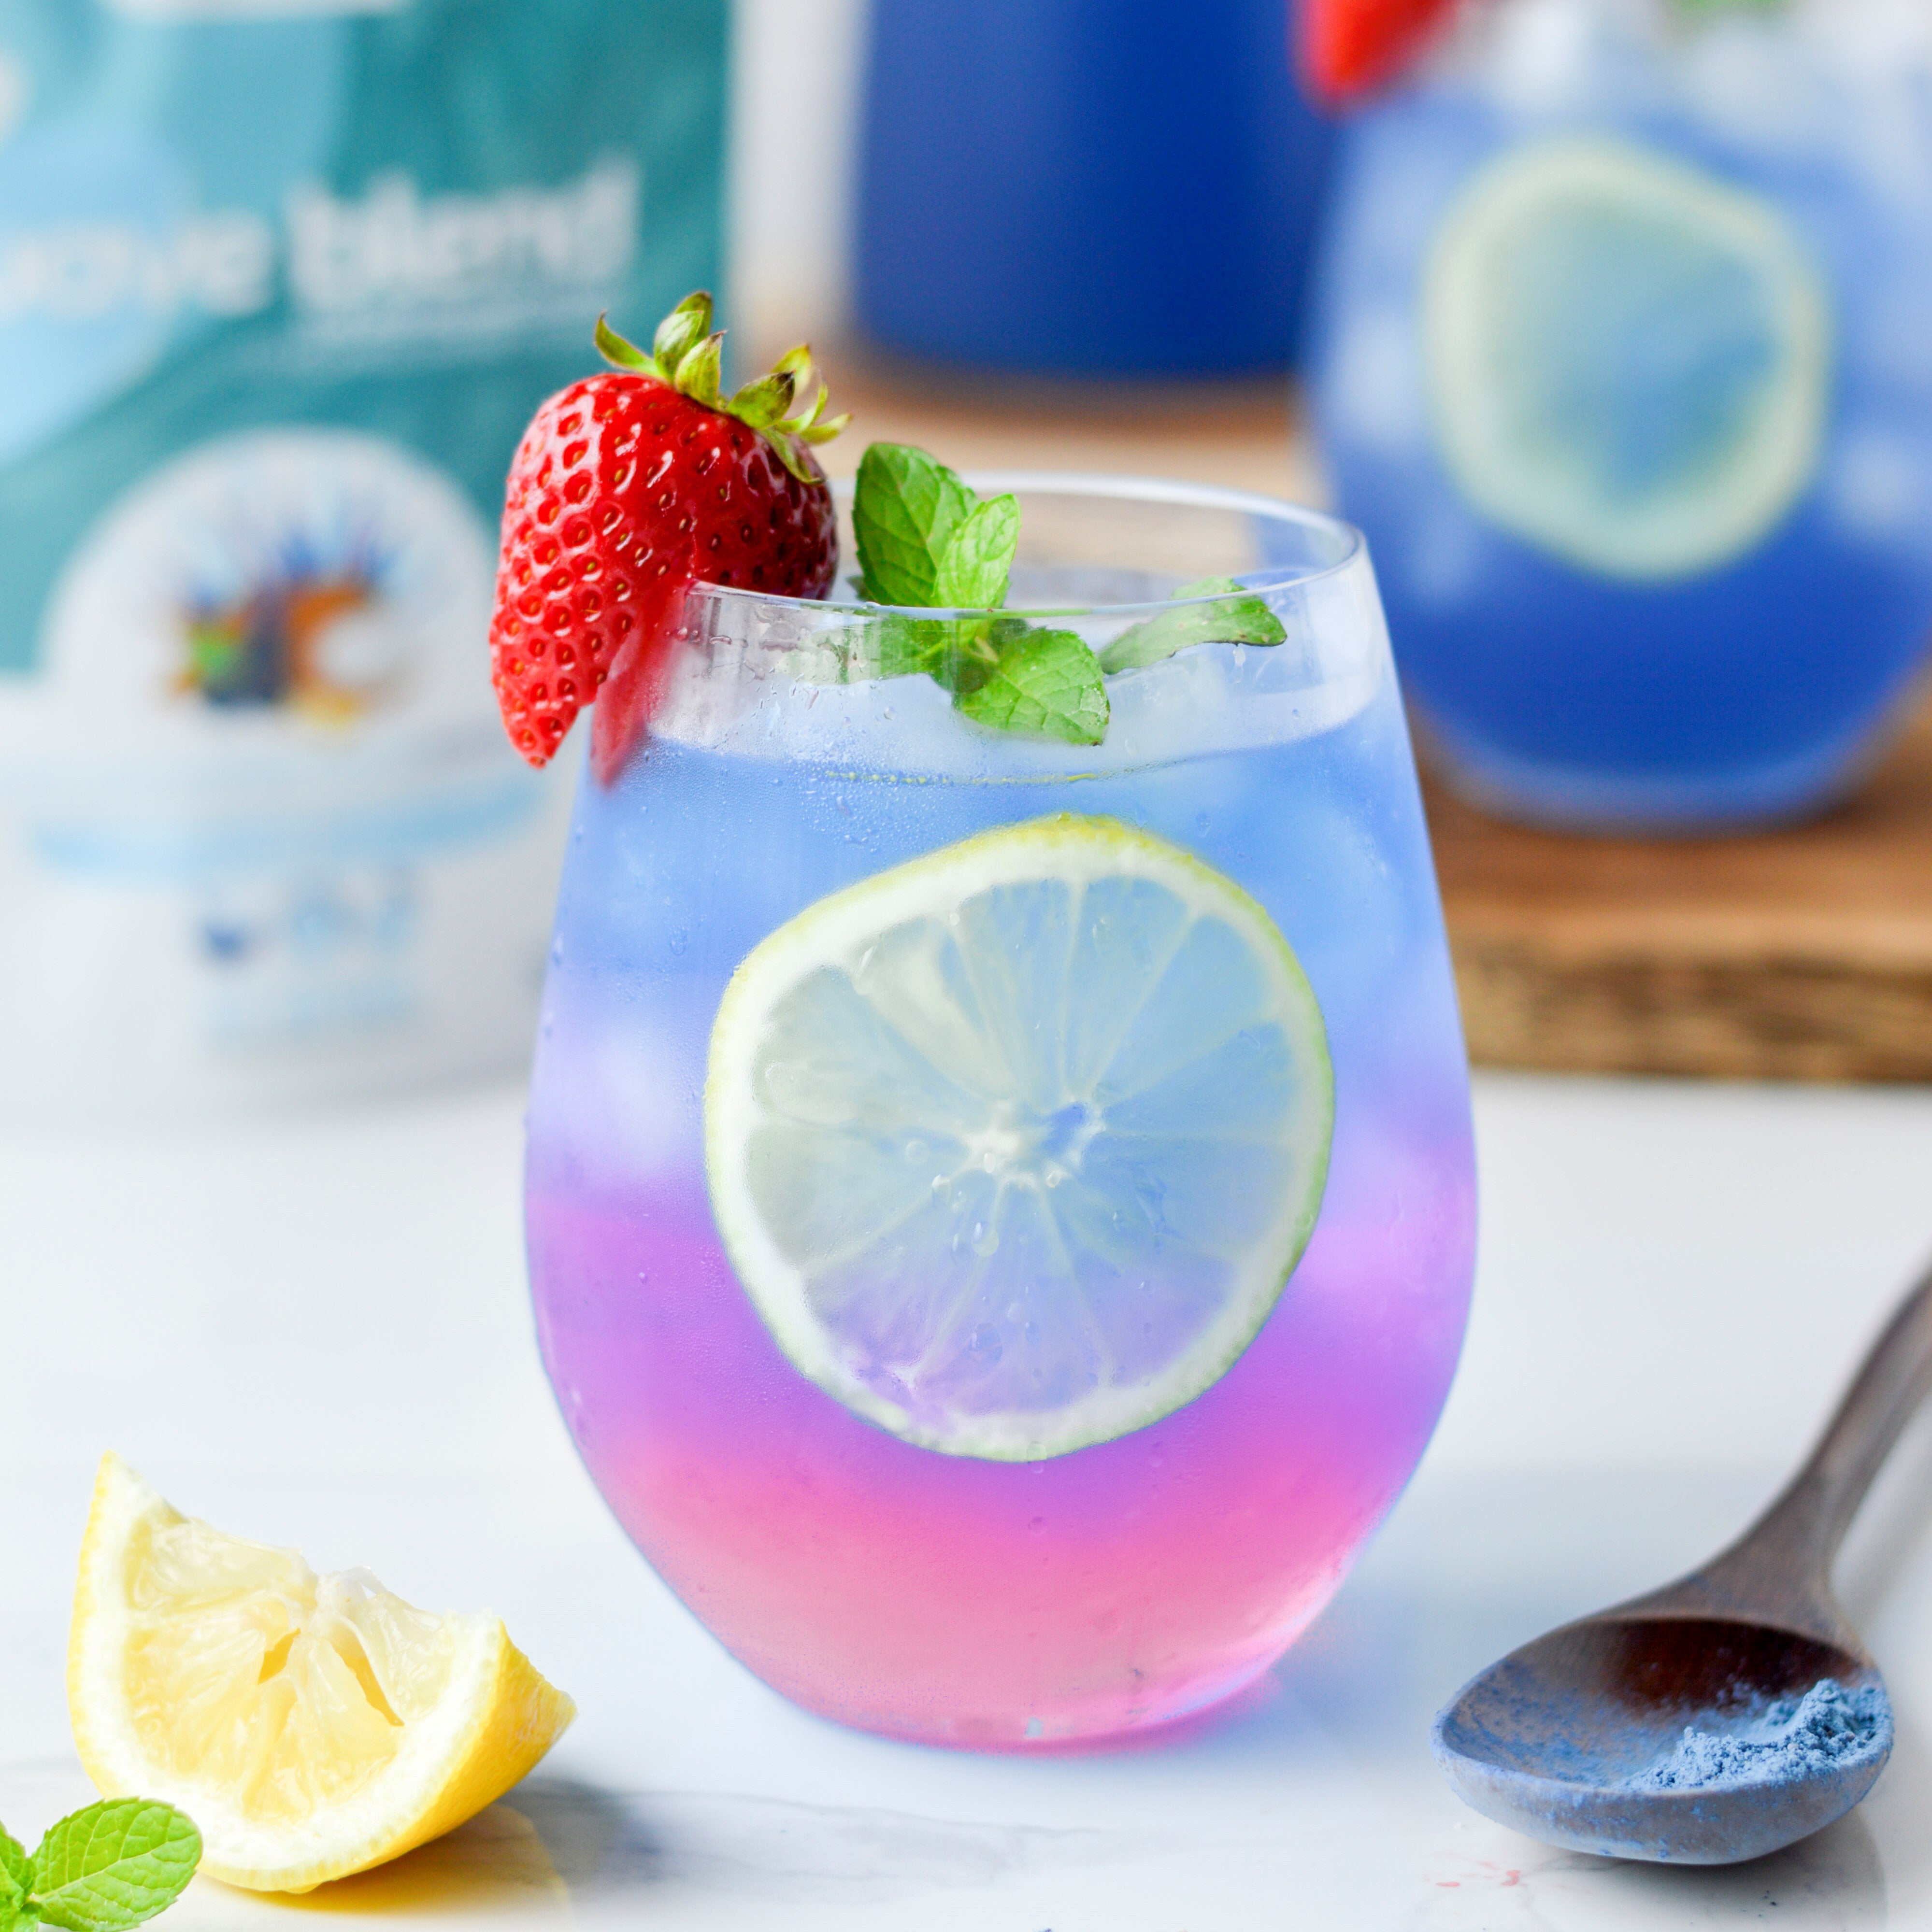 Sparkling wave refresher made using SMOOV wave blend. Mocktail packed with protein, antioxidants, vitamins for energy, digestion, health and immunity.